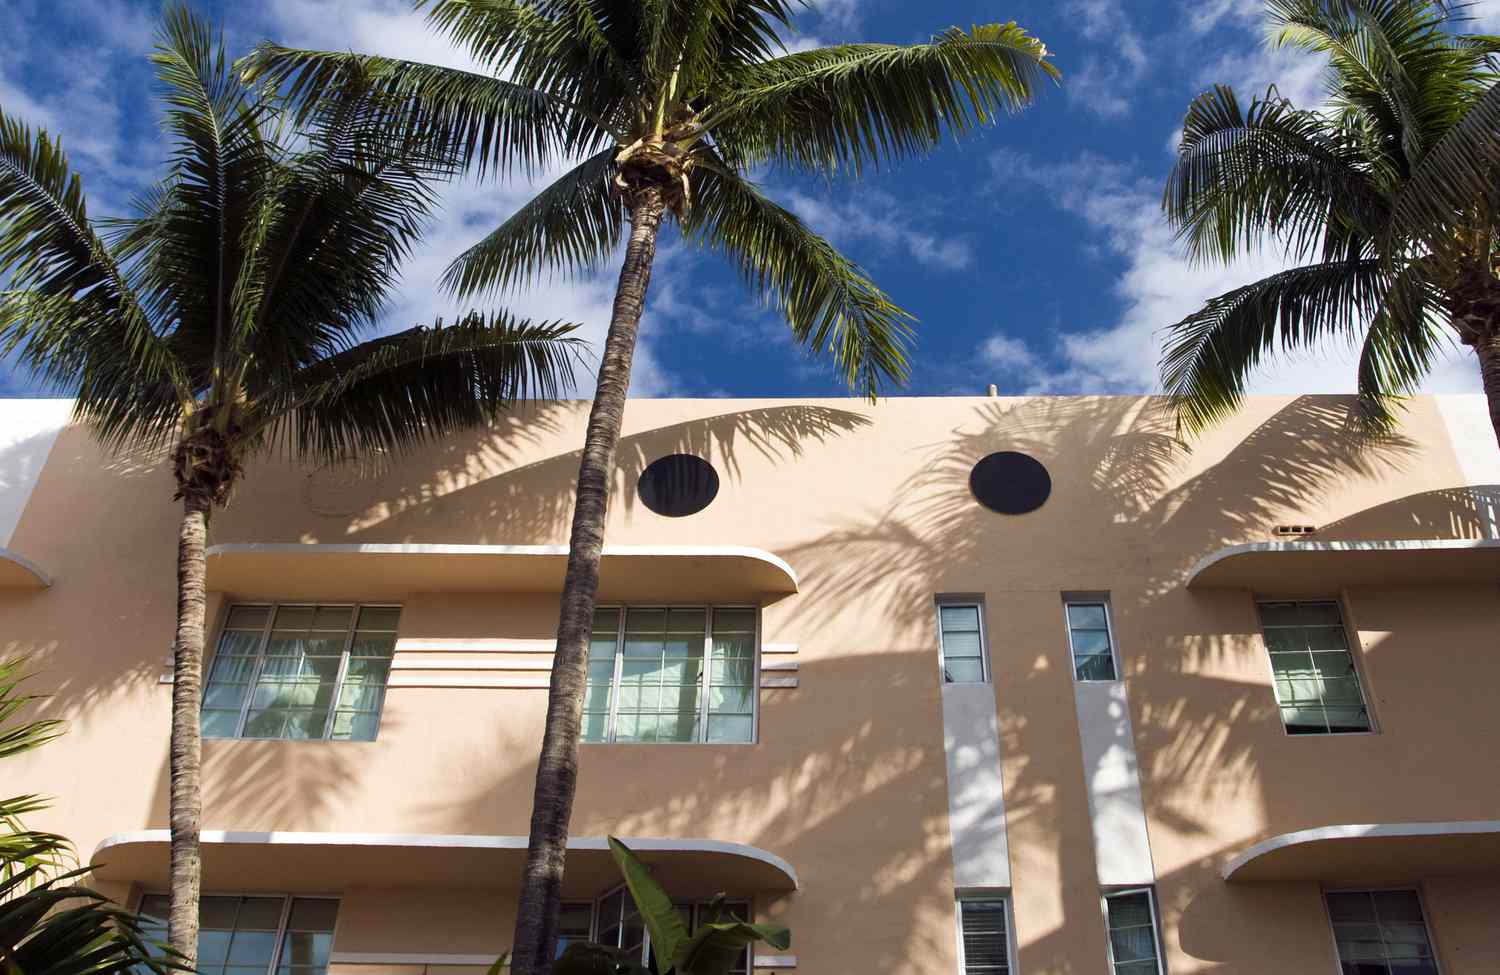 Salmon-pink is a common color on the Art Deco apartments of South Miami Beach, Florida